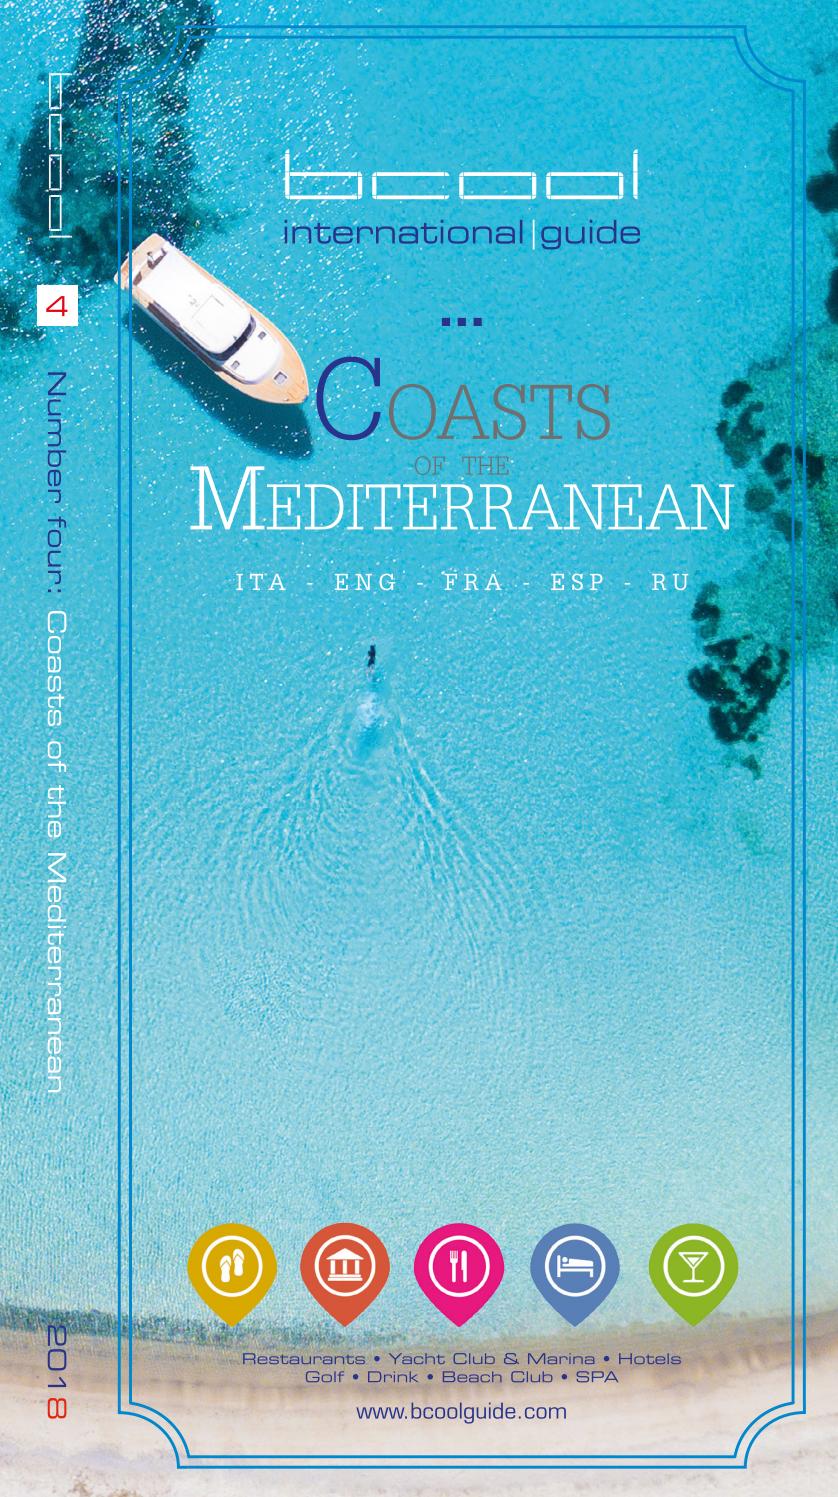 Salon De Jardin 6 Places Inspirant 2018 Bcool Guide "coasts Of the Mediterrean" by Bcool City